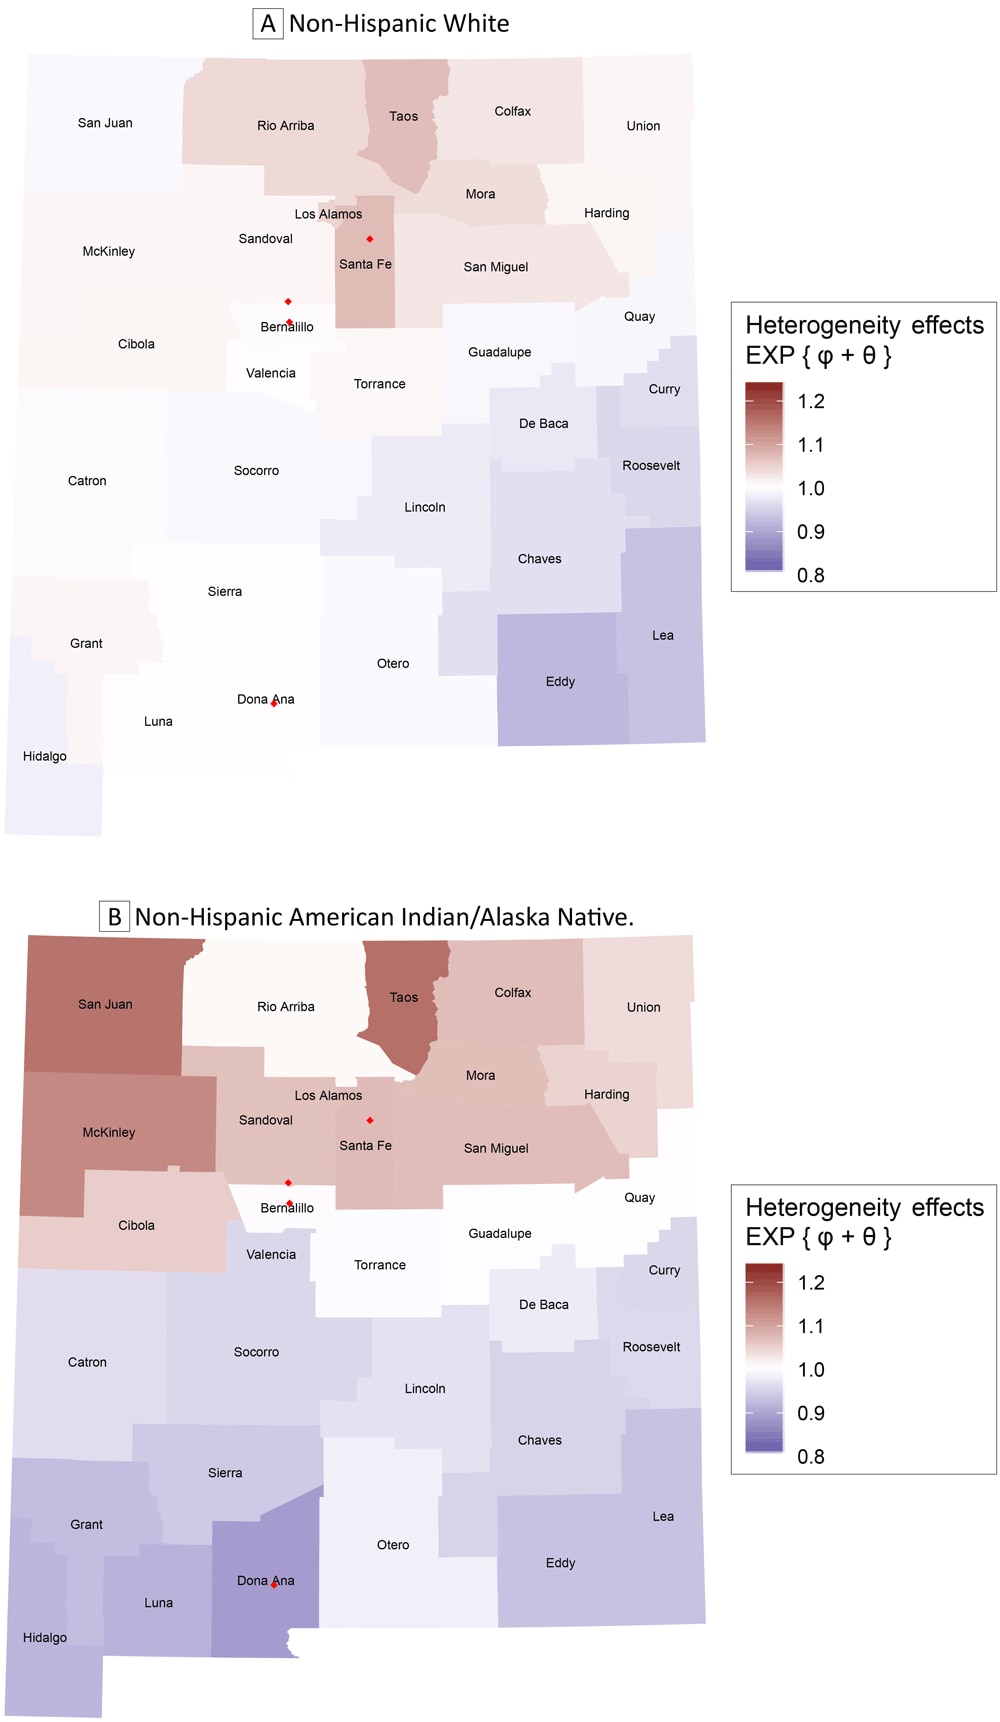 Exponentiated sum of the posterior average county-level heterogeneity effects obtained from the proposed model. Map A gives the results for non-Hispanic White women and Map B gives the results for non-Hispanic American Indian/Alaska Native women. Red diamonds depict major cites (Albuquerque in Bernalillo County, Las Cruces in Dona Ana County, Rio Rancho in Sandoval County, and Santa Fe in Santa Fe County).